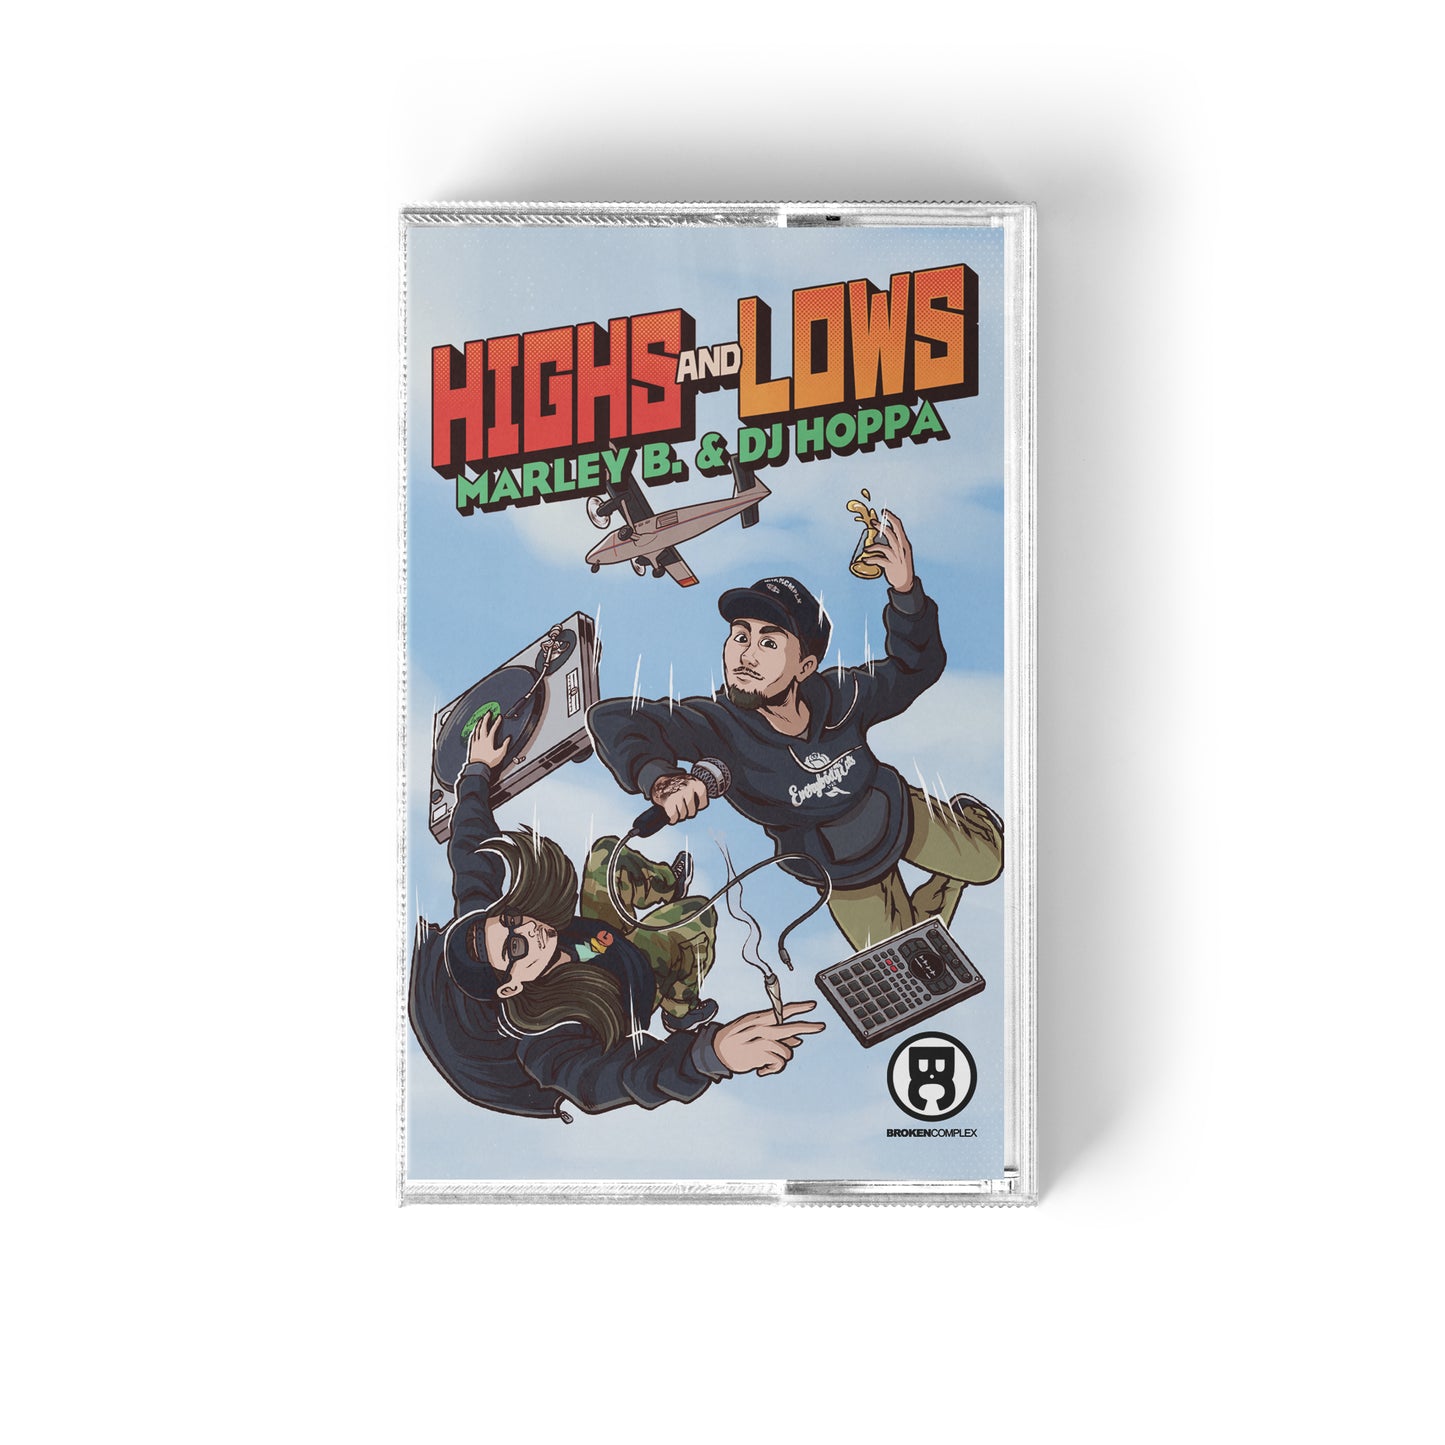 Highs And Lows (Cassette)